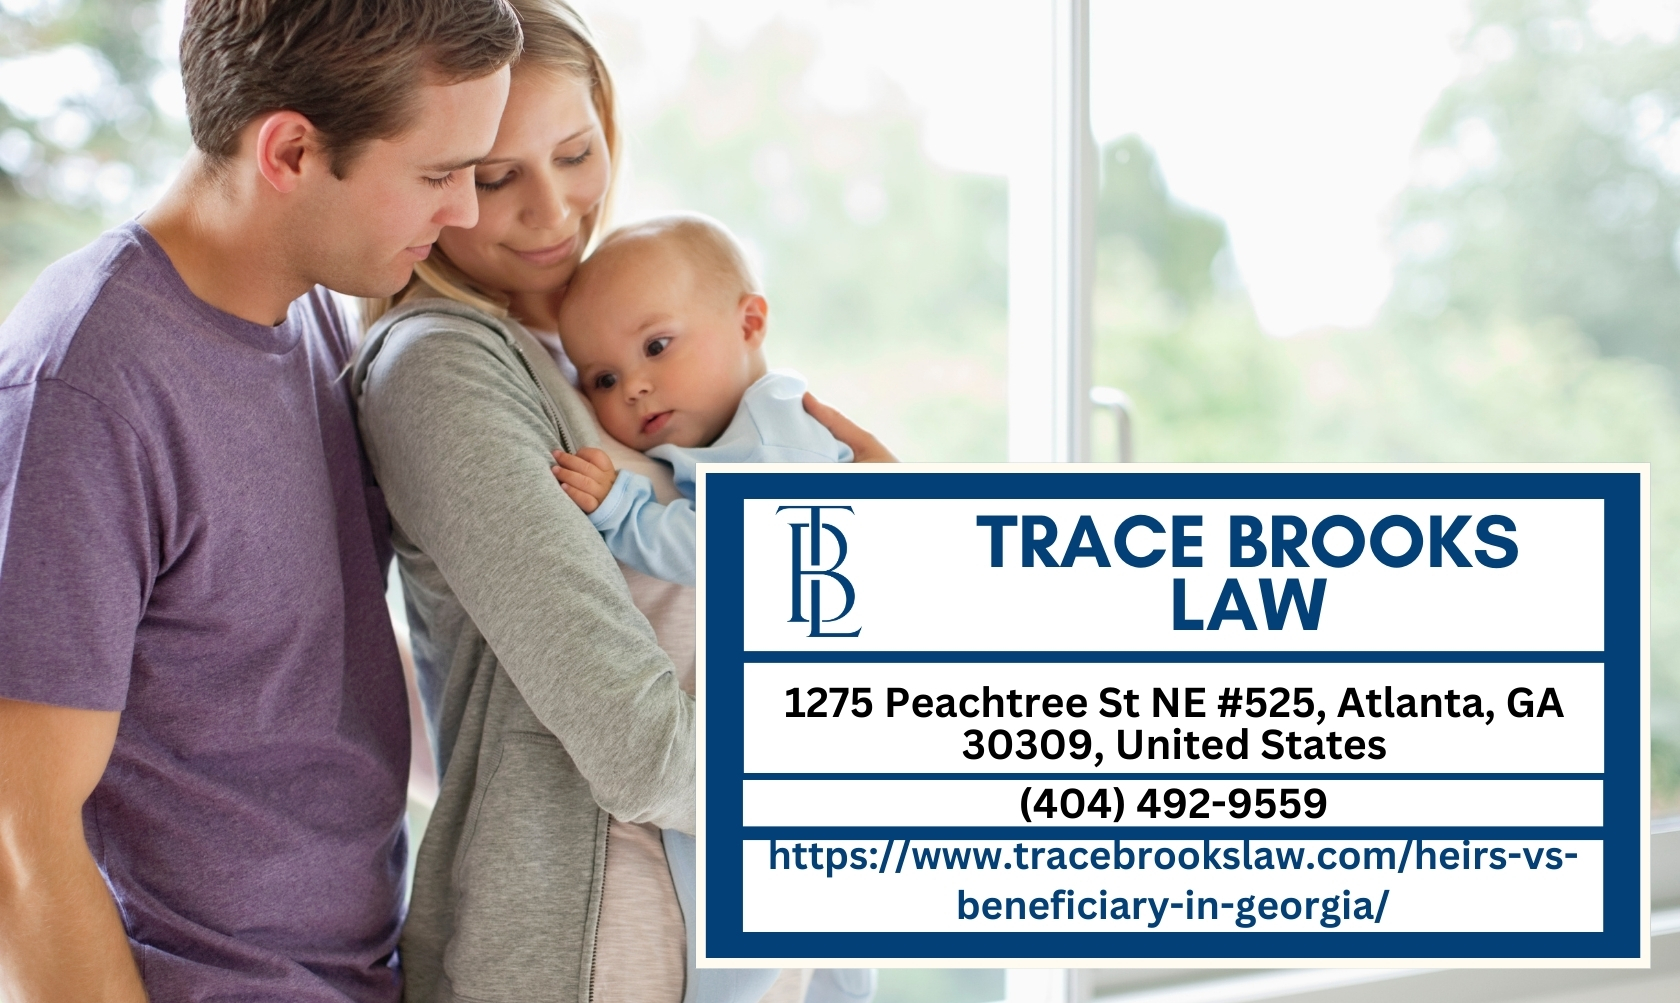 Atlanta Estate Planning Lawyer Trace Brooks Clarifies Distinctions Between Heirs and Beneficiaries